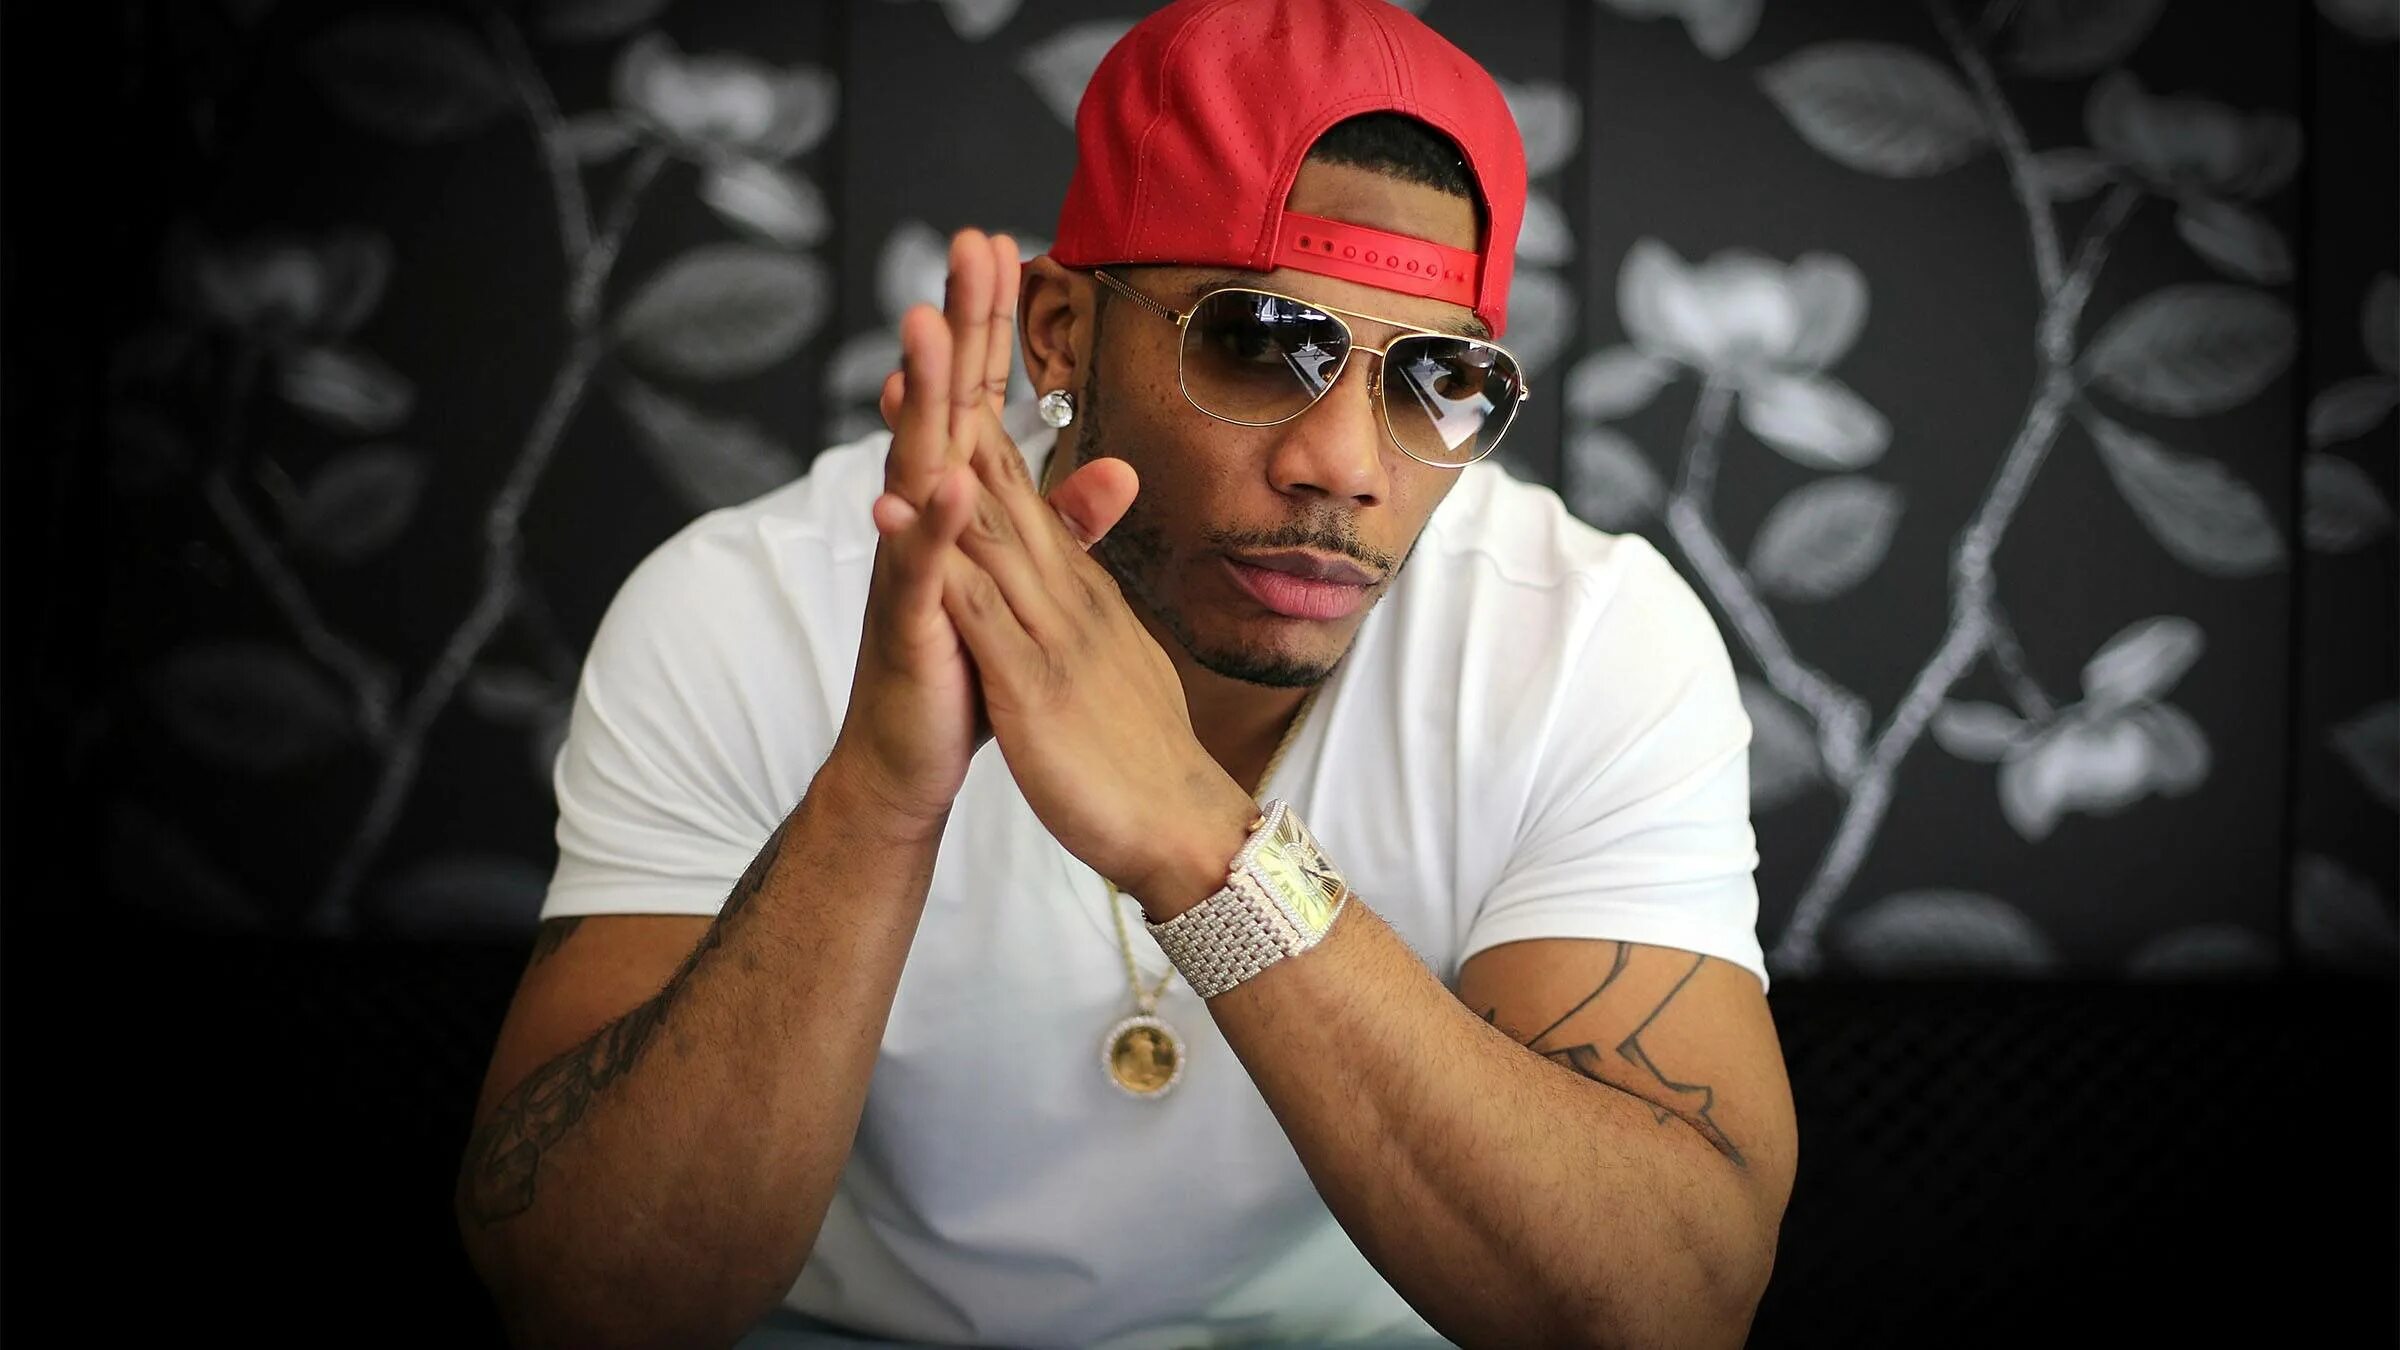 Nelly рэпер. Nelly 2023 репер. Nelly 2020. Nelly 2022. Хит рэпер